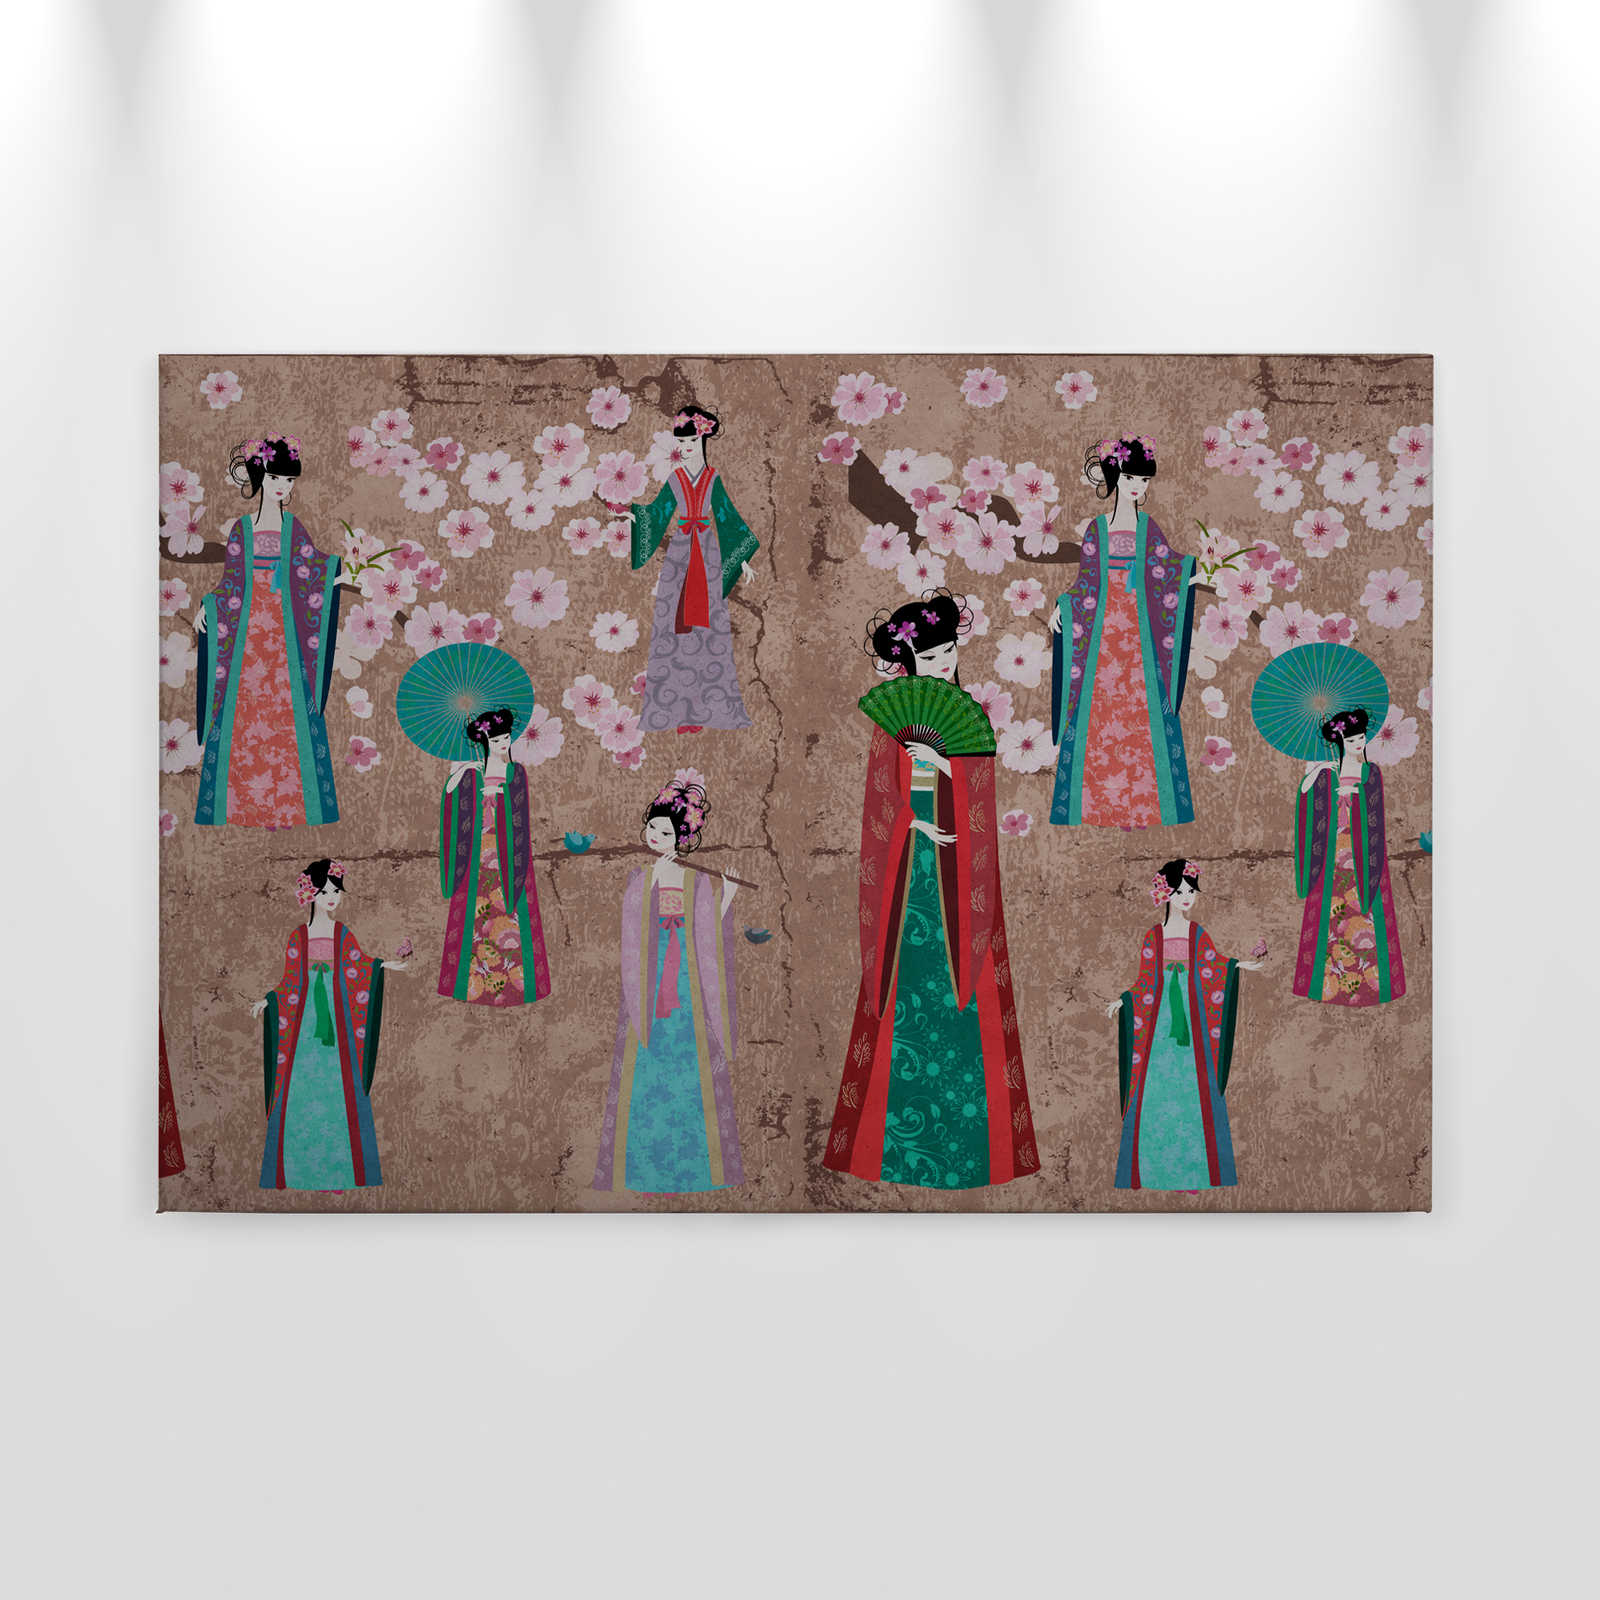             Canvas painting Japan Comic with cherry blossoms | beige, blue - 0,90 m x 0,60 m
        